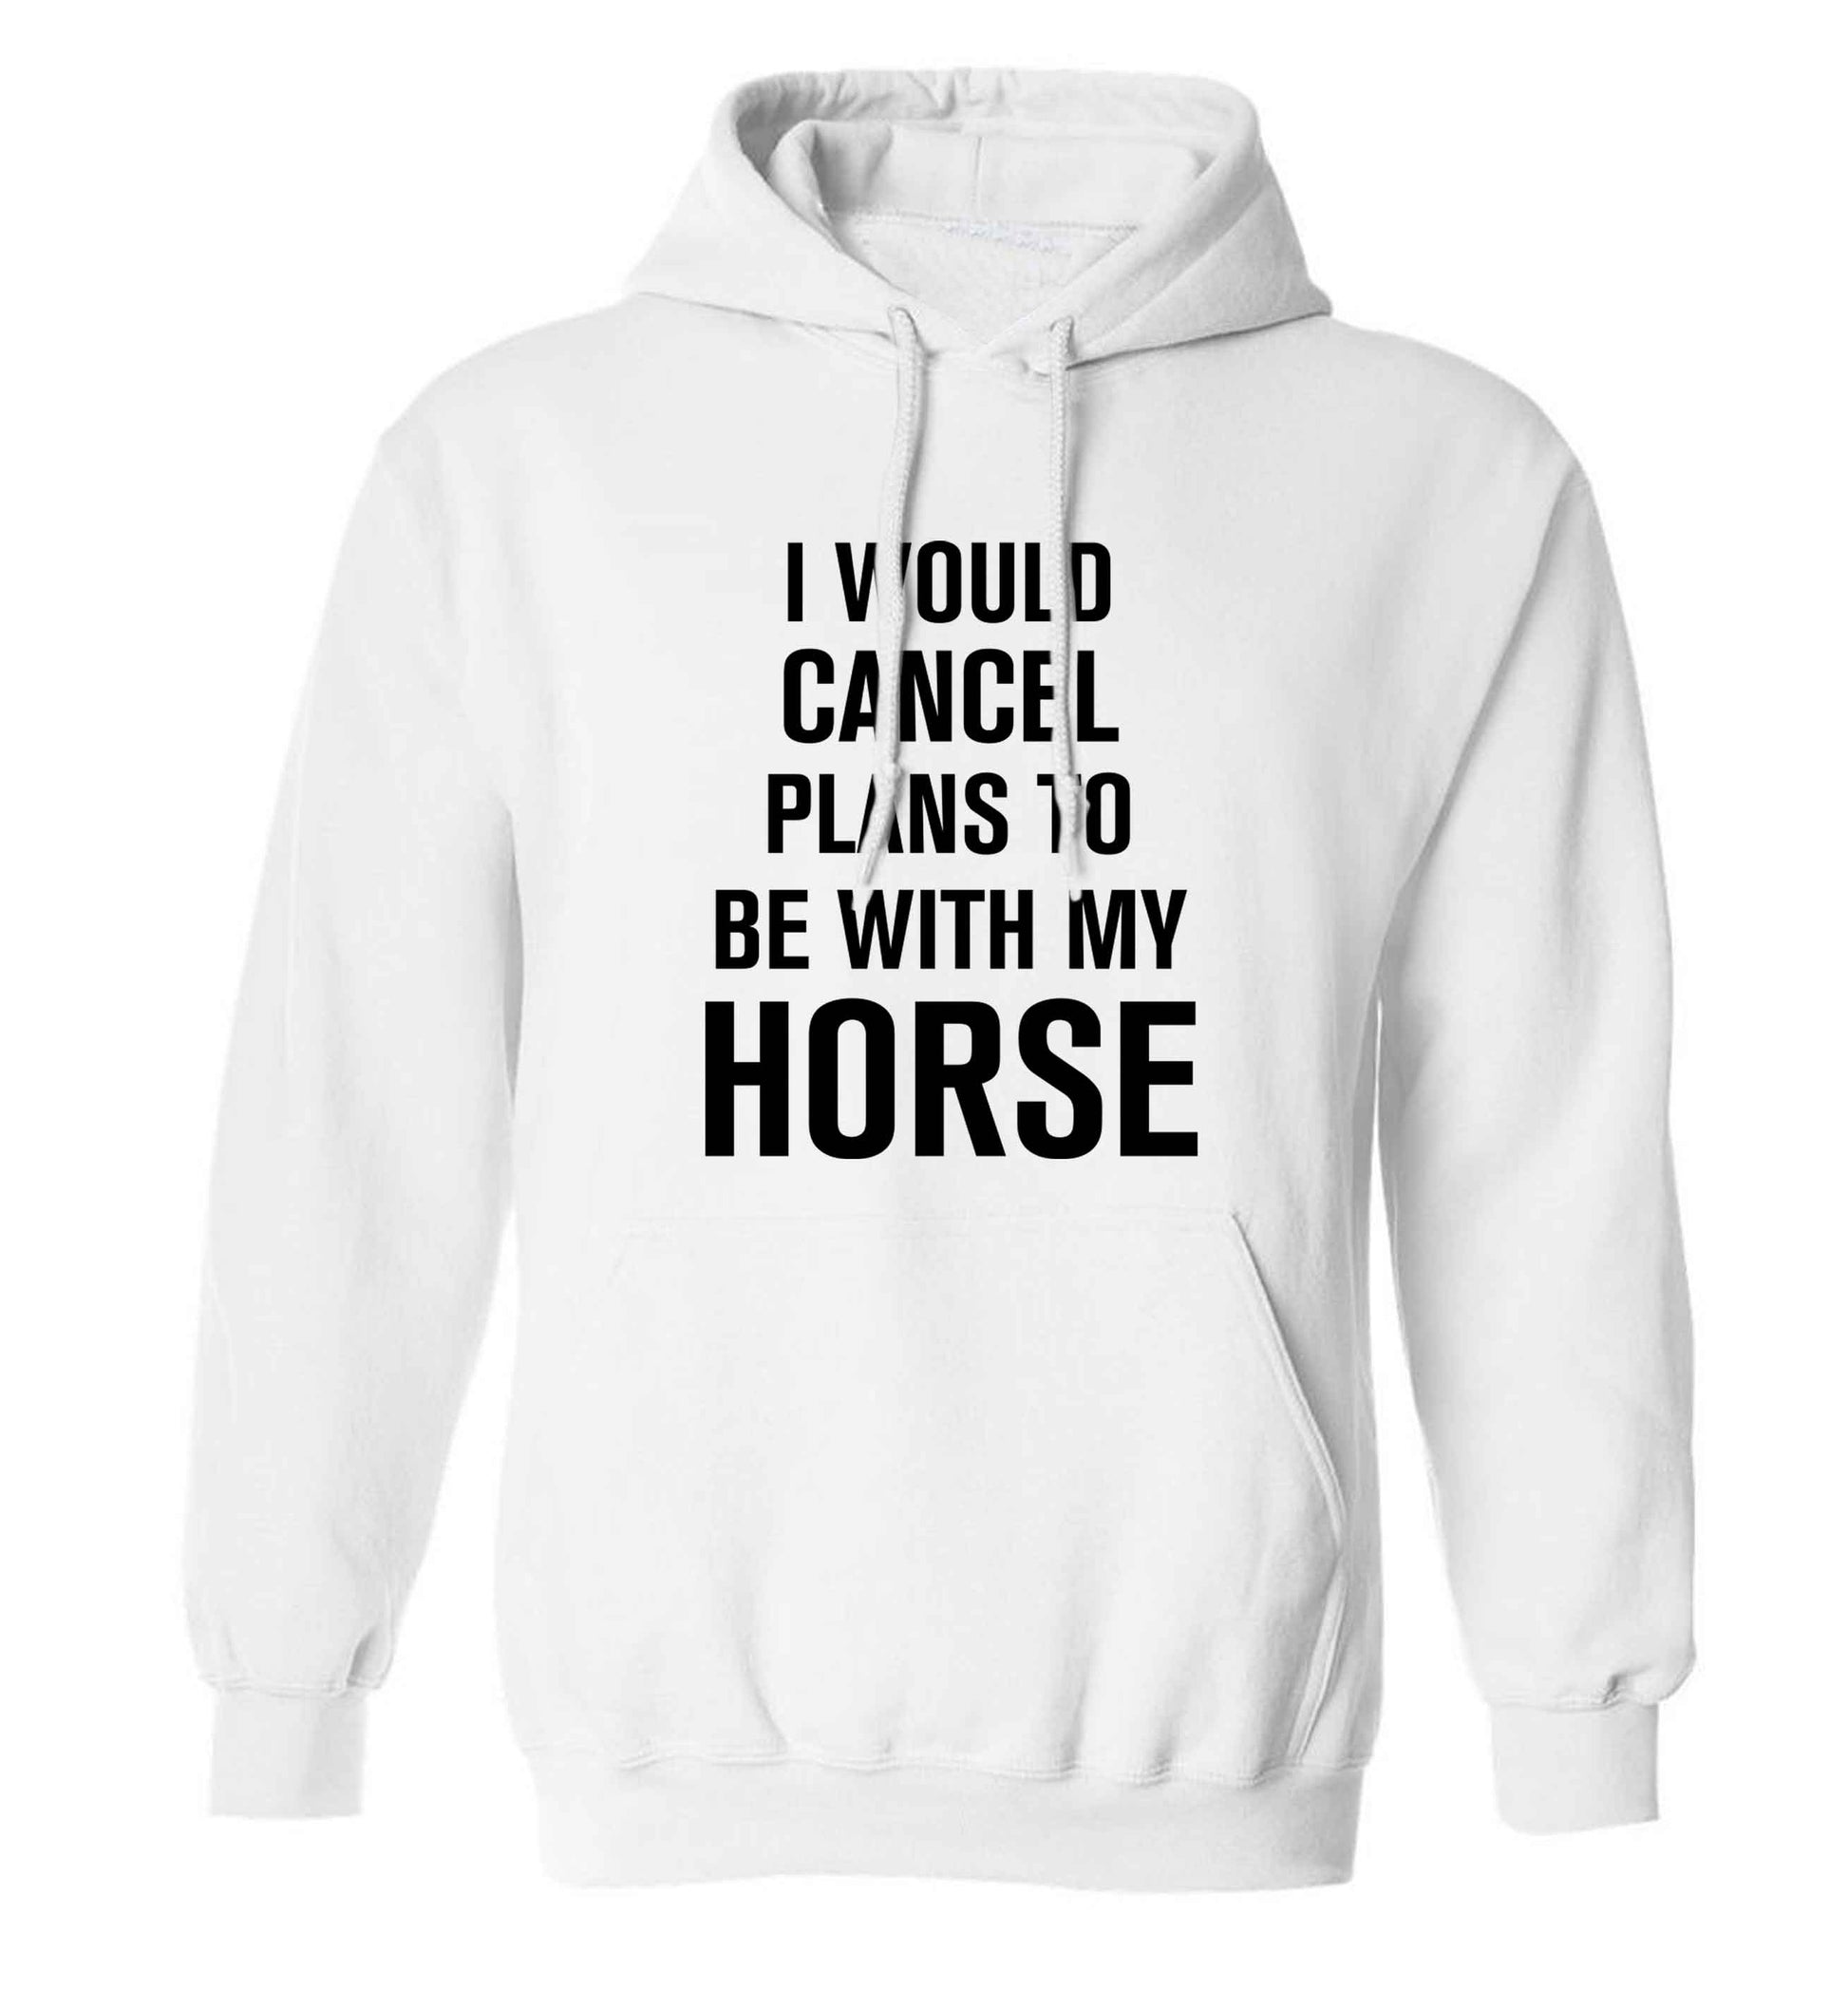 I will cancel plans to be with my horse adults unisex white hoodie 2XL